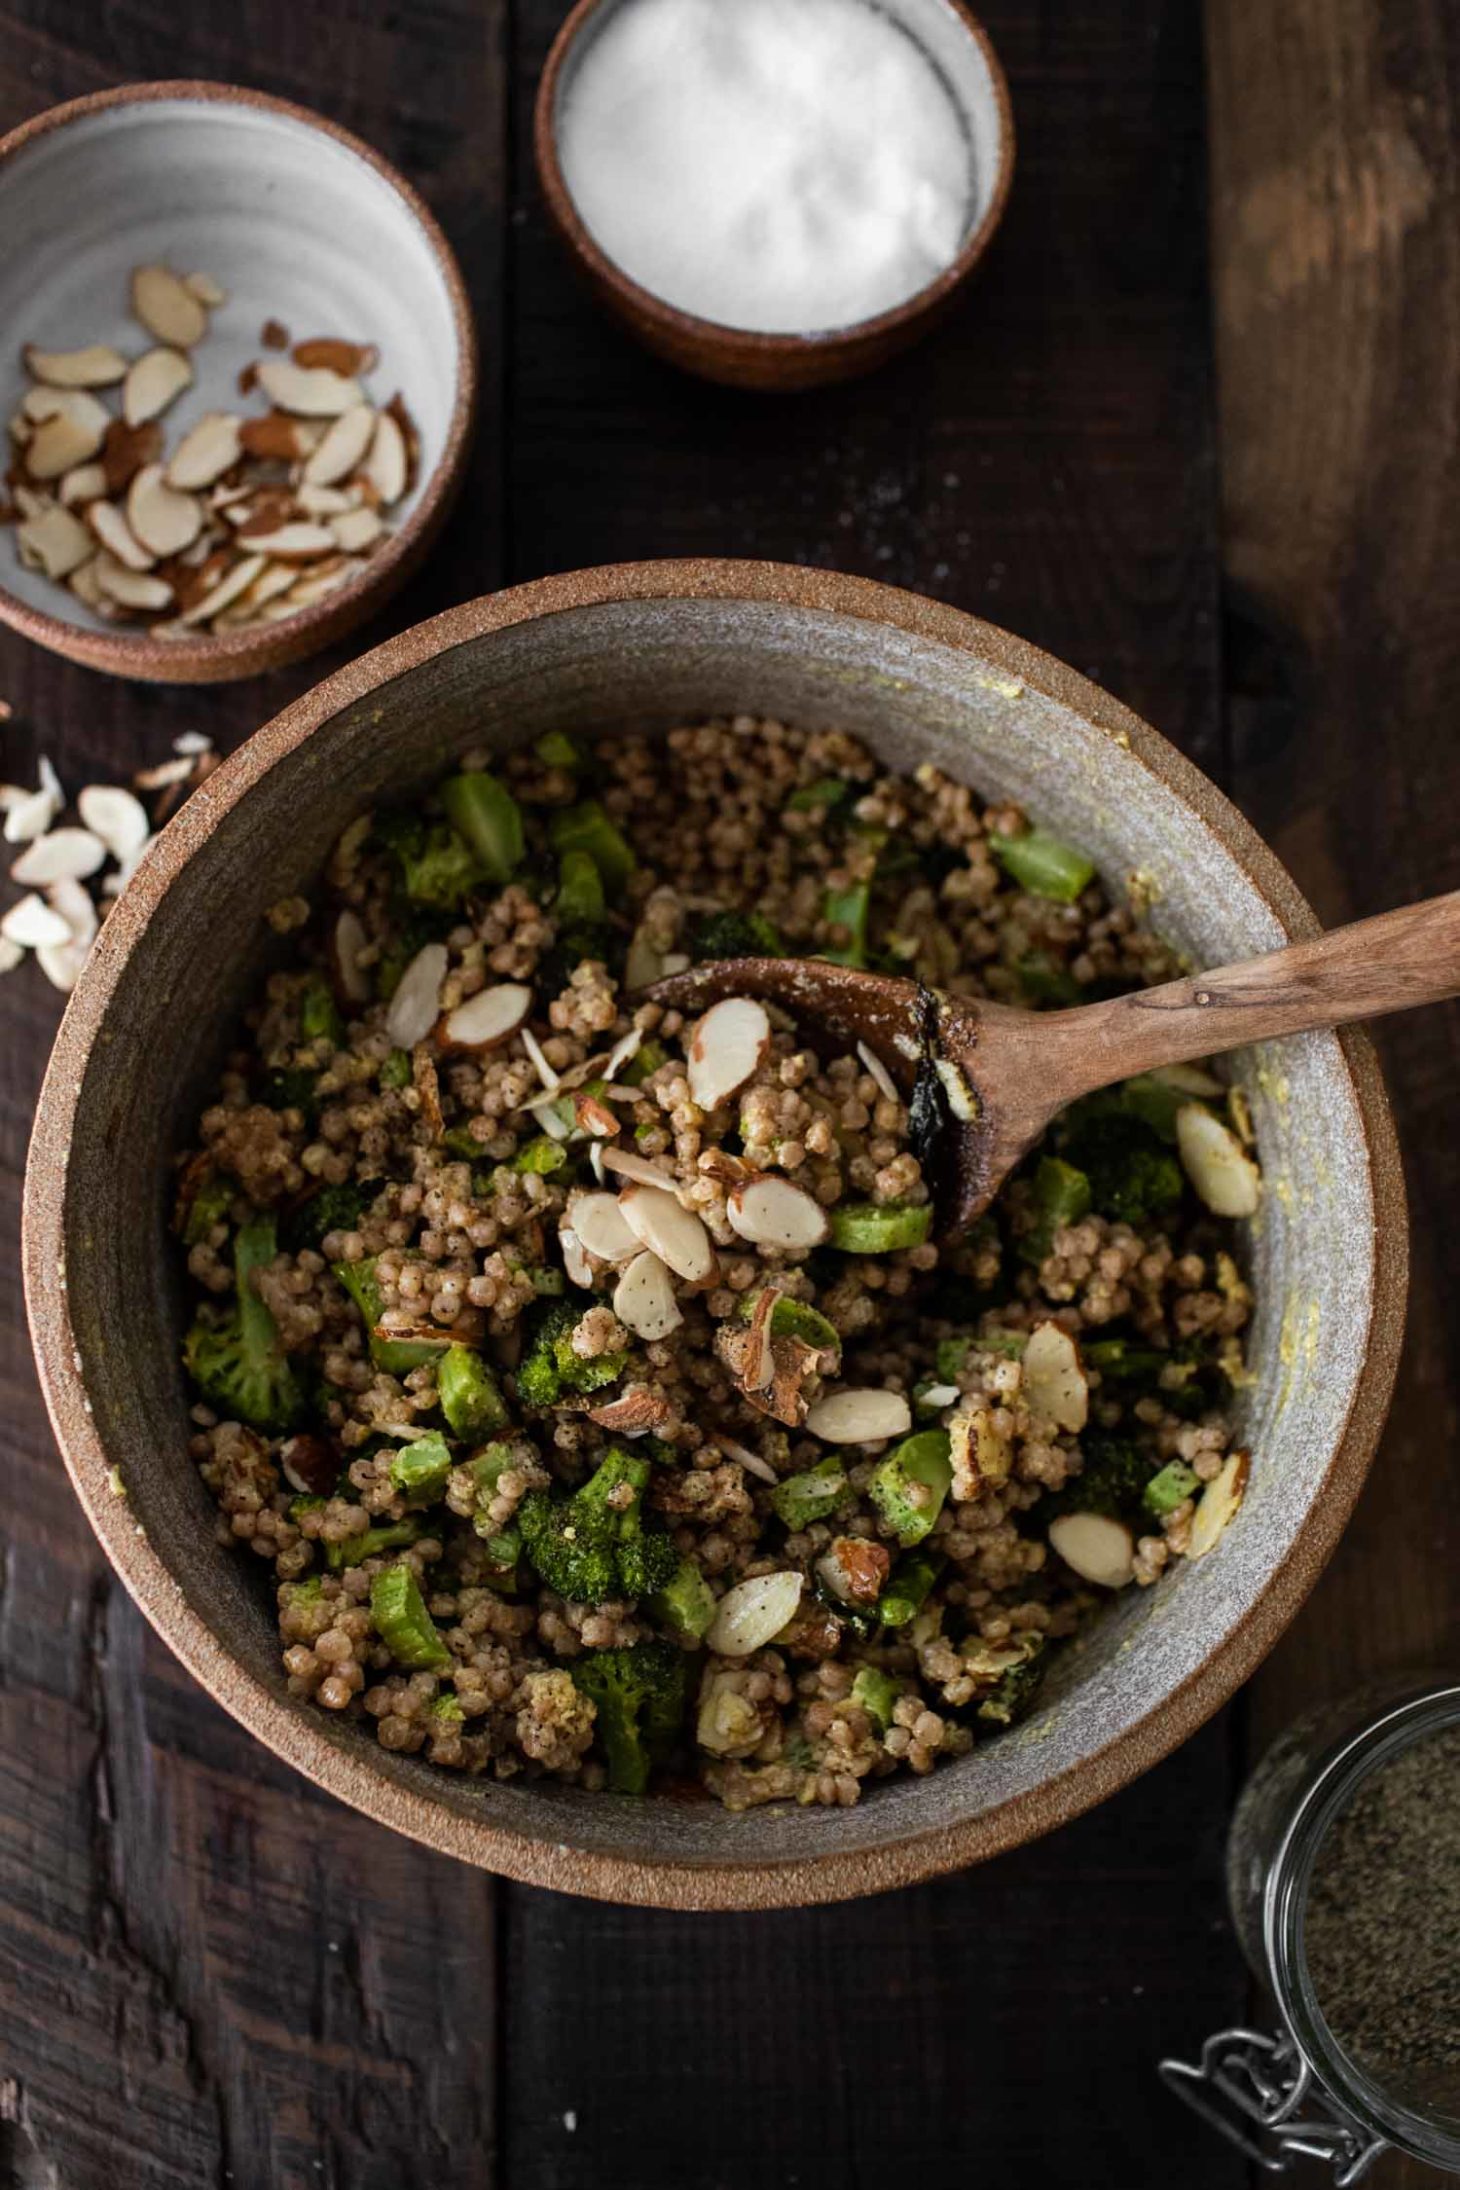 Broccoli Salad With Couscous And Tahini Dressing Naturally,13 Cup In Ml